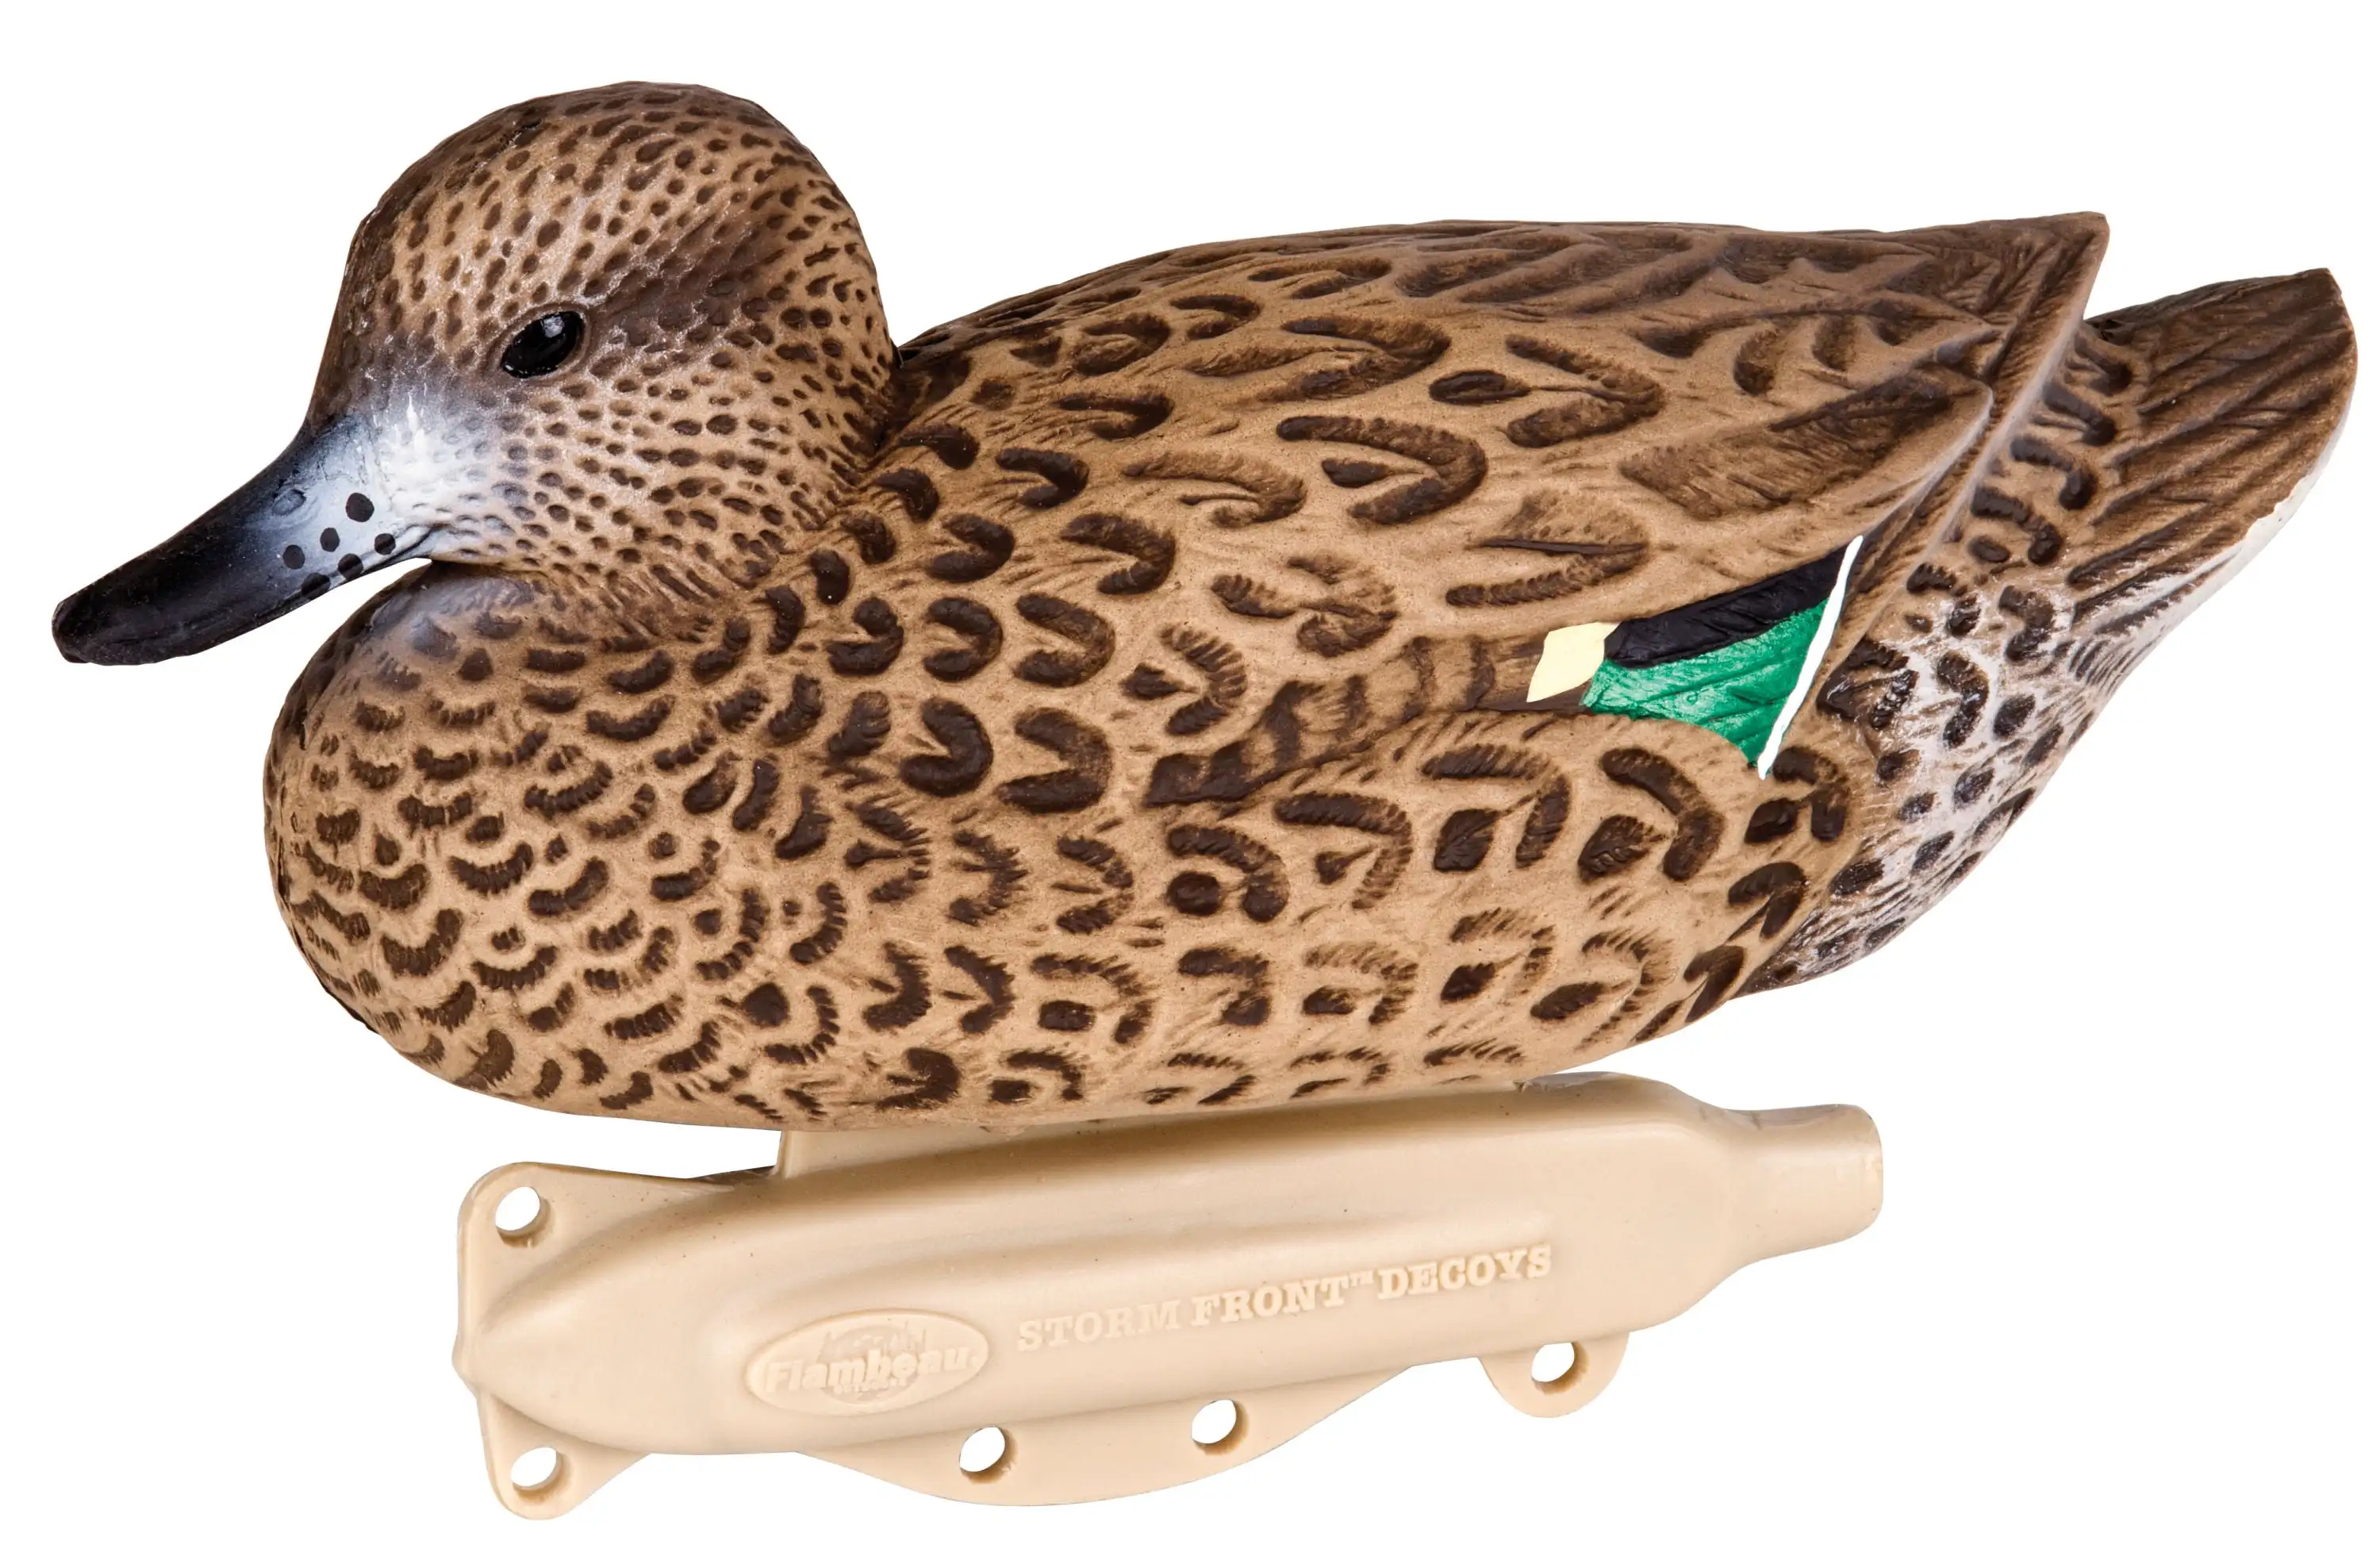 

Flambeau Outdoors, 8015SUV Green Wing Teal, 10.5 inch, Waterfowl Decoy, 6 Pack, 4.4 Pounds